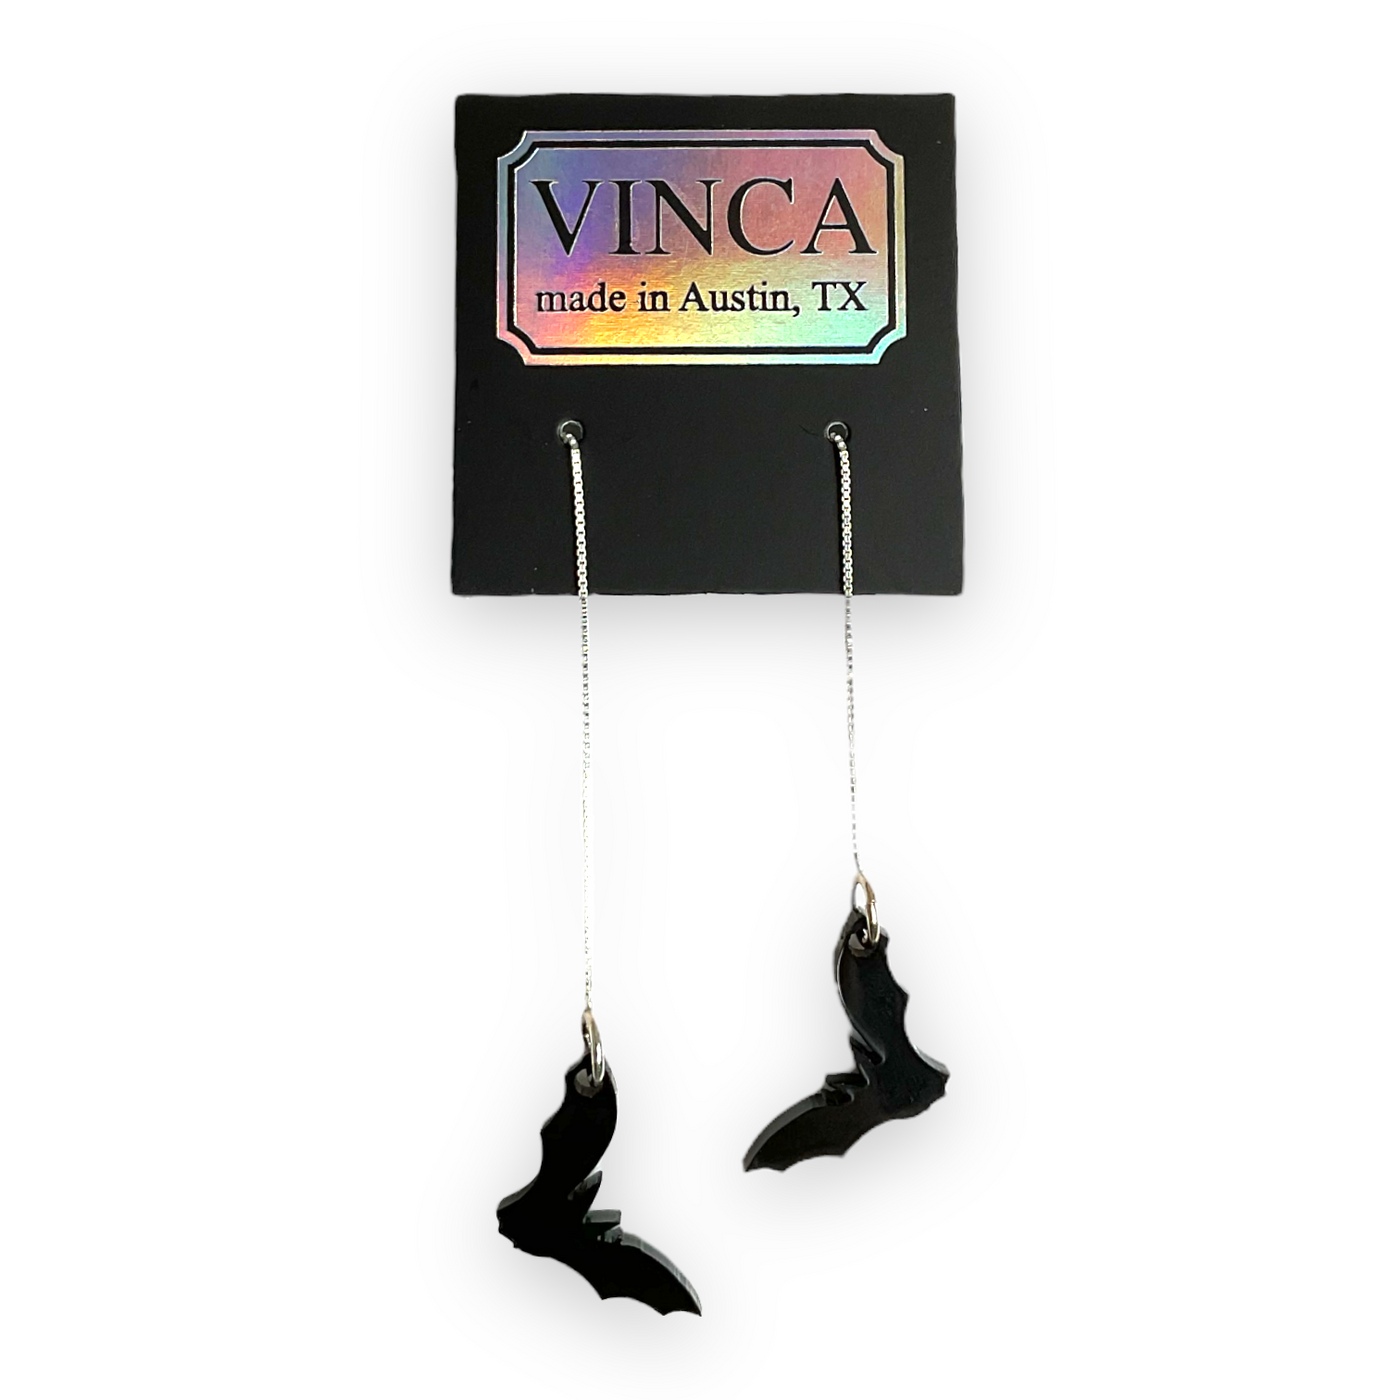 Shiny, bat charms attached to sterling silver ear threaders and threaded through a Vinca-branded hangtag.